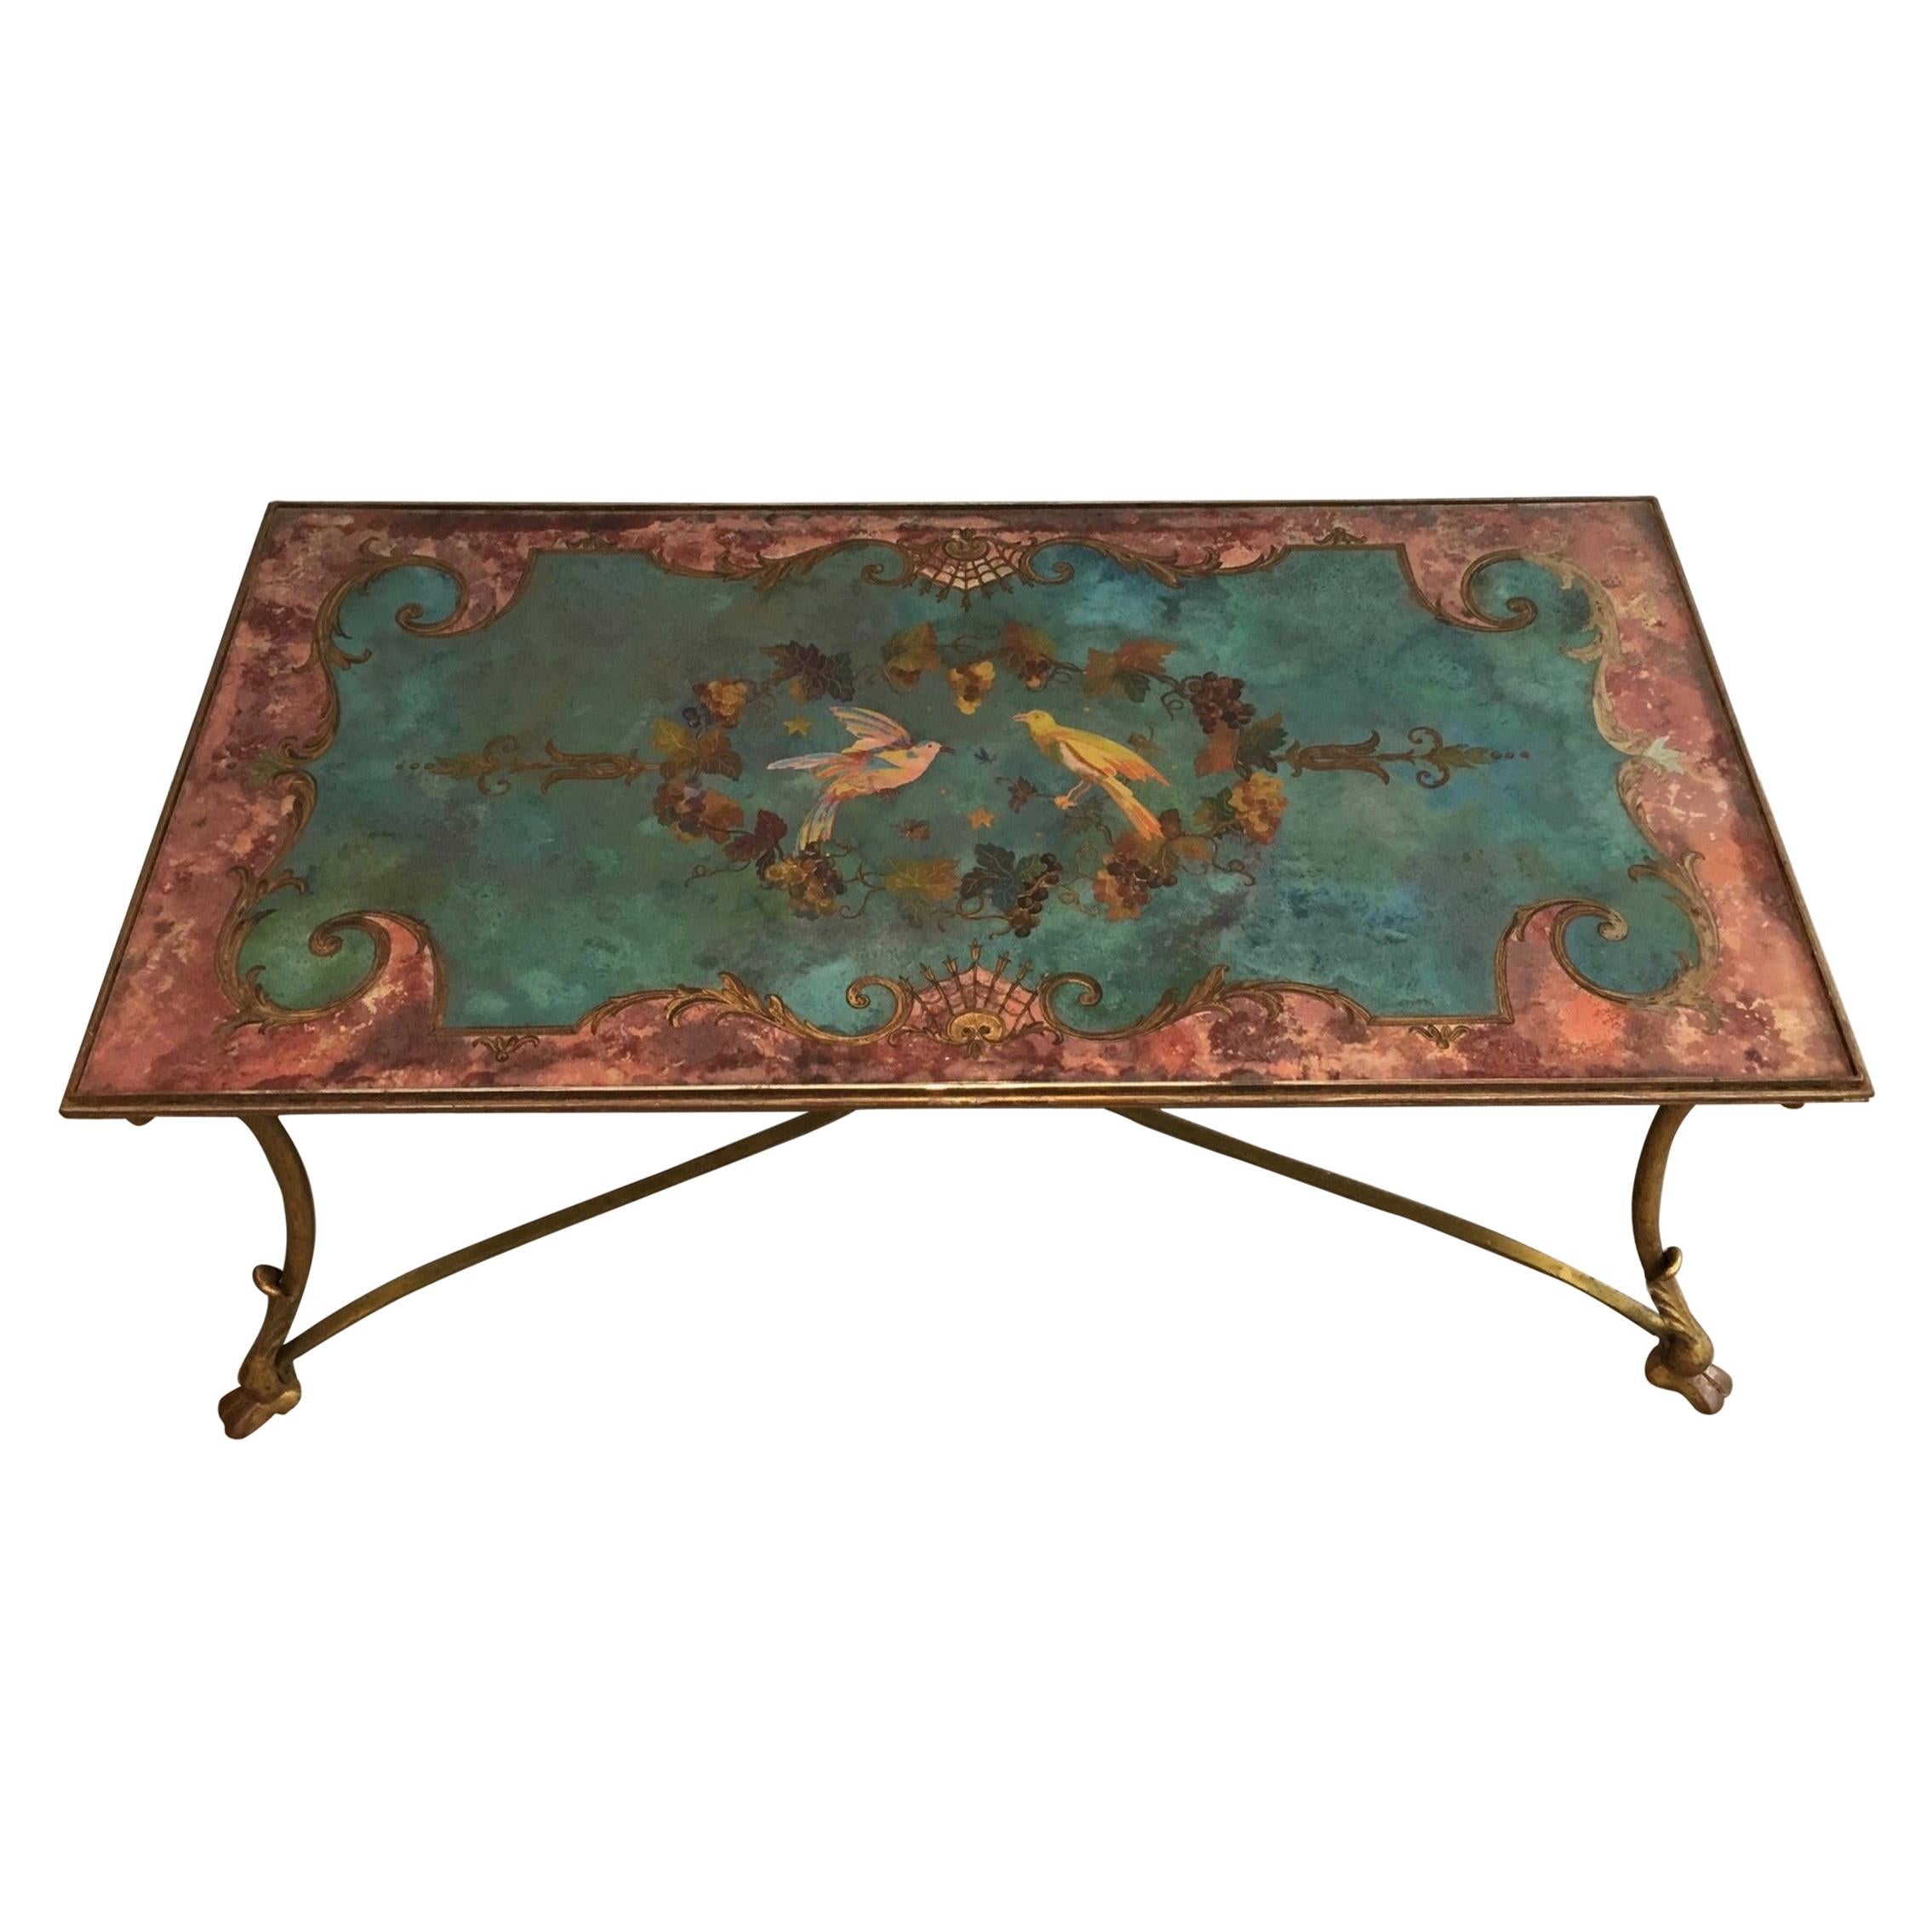 Coffee Table with Beautiful Painting on Top Representing Birds and Flowers